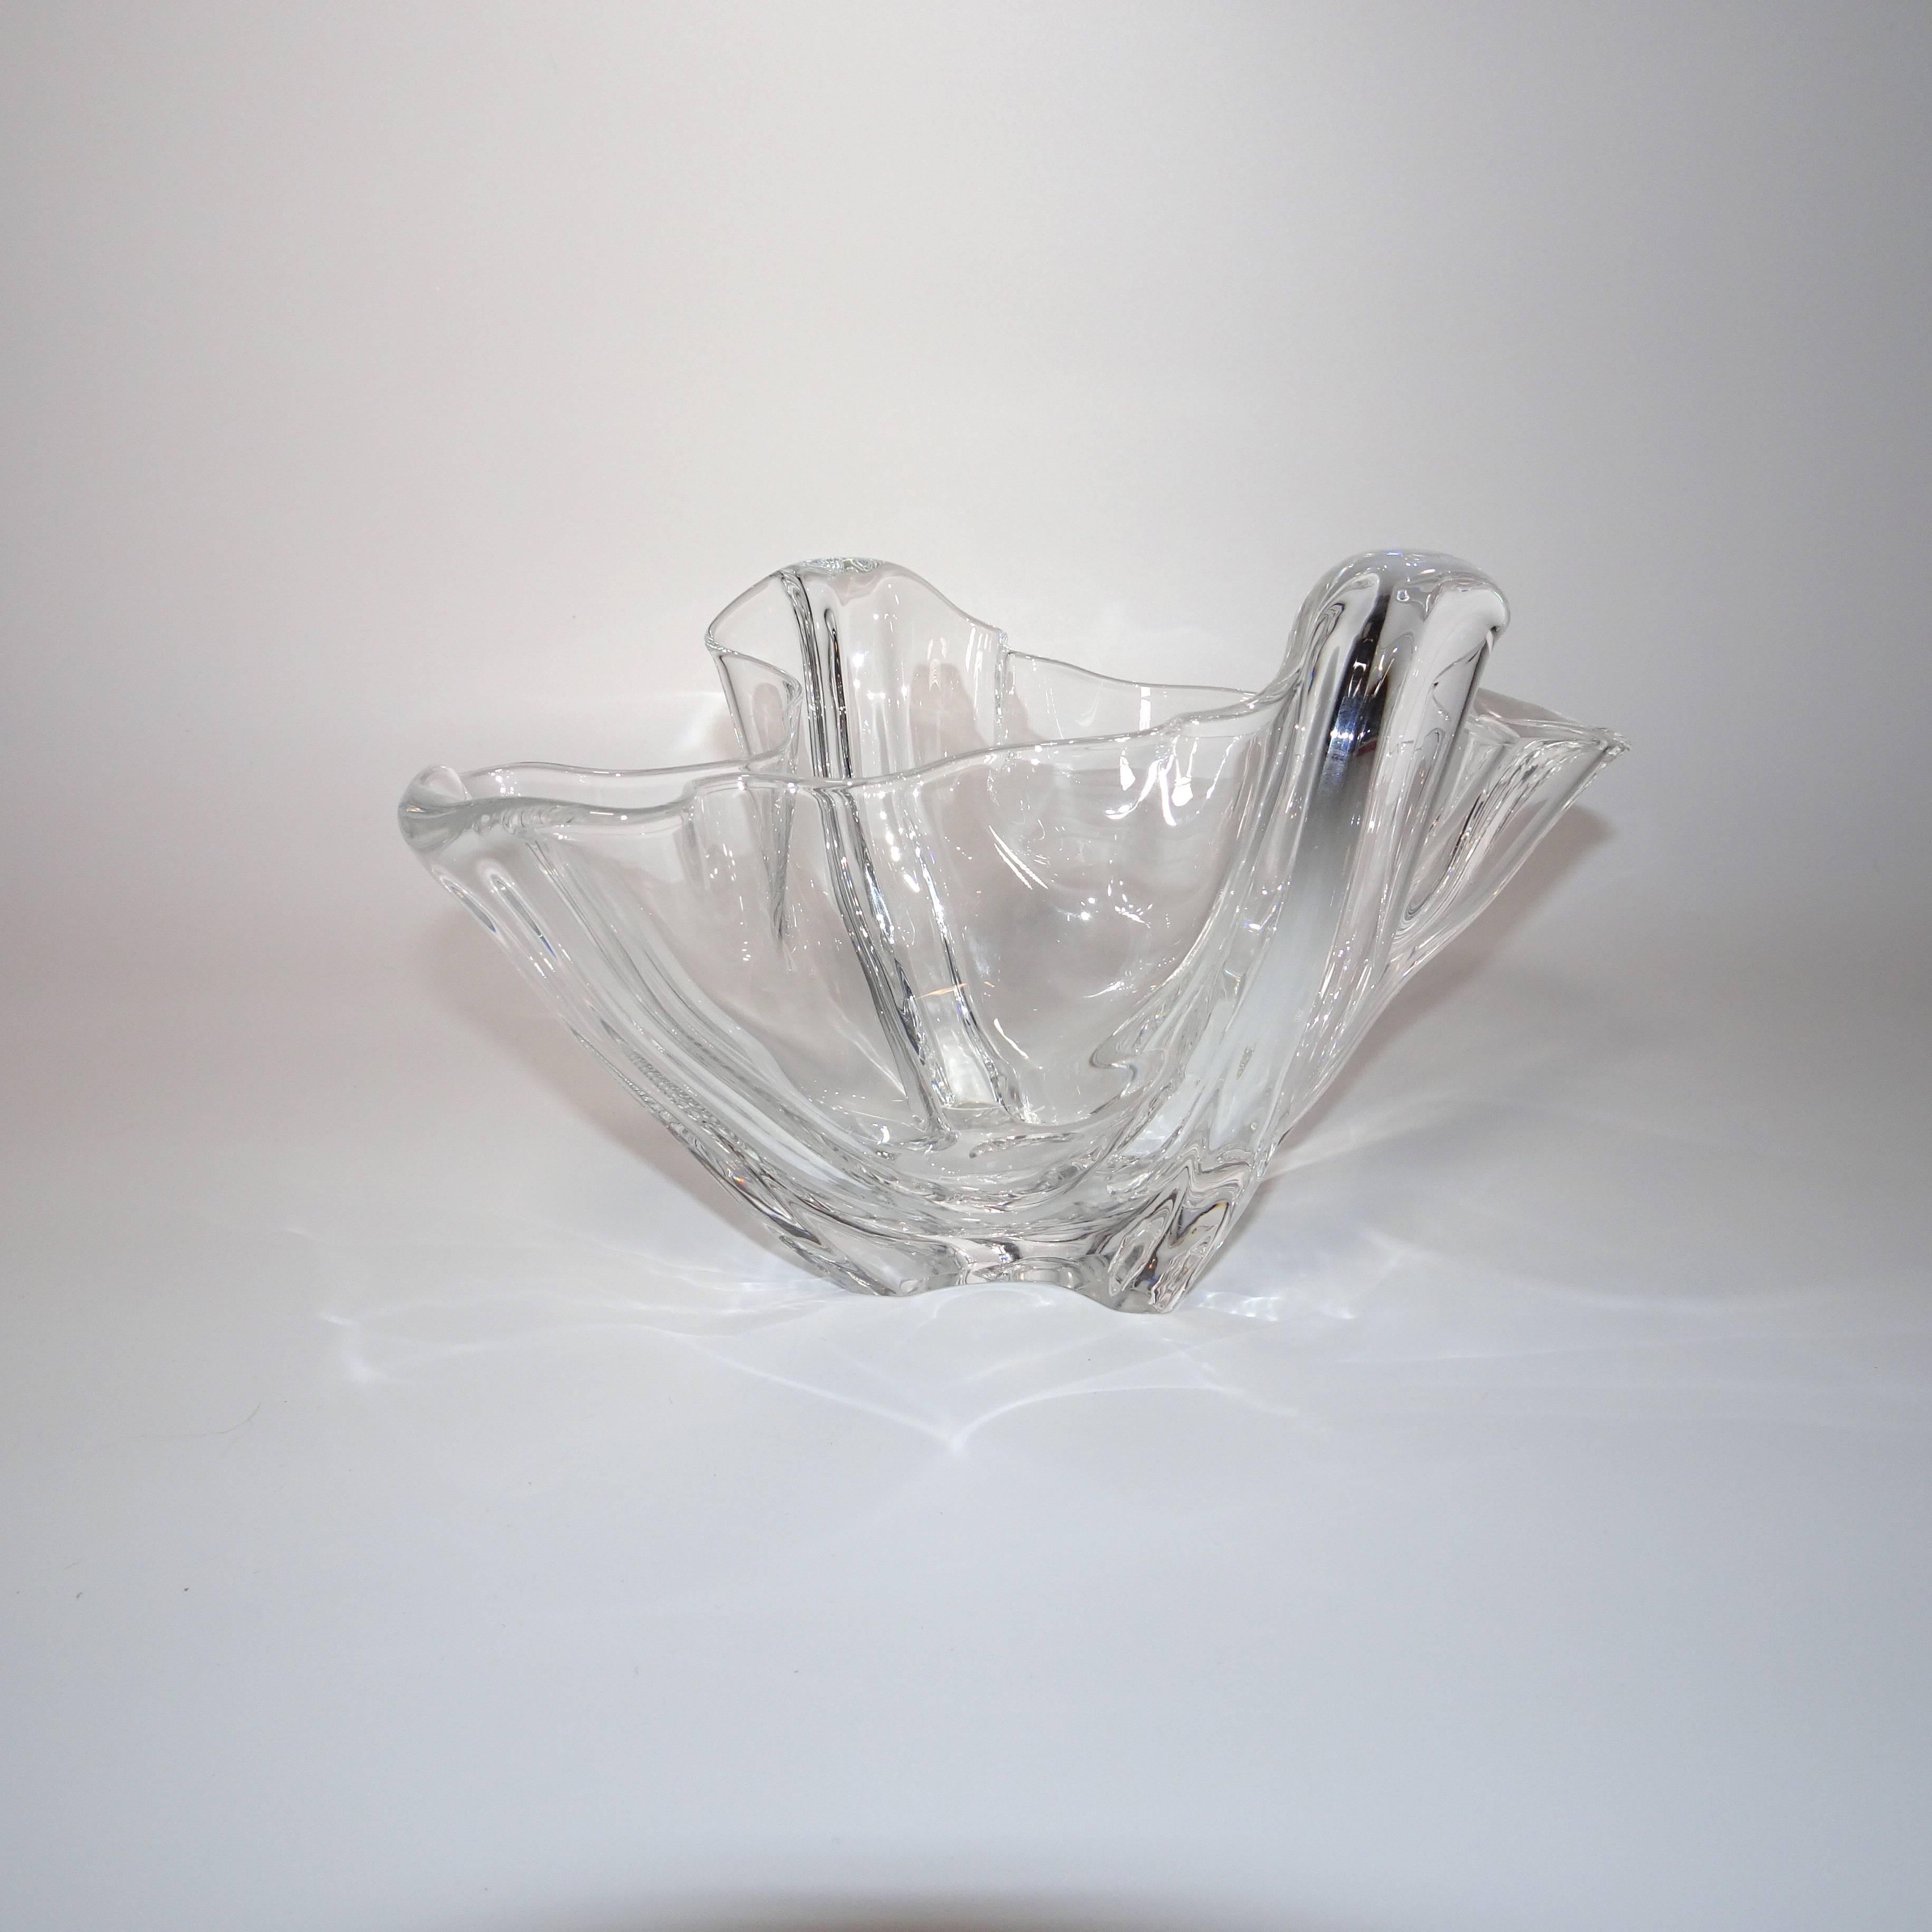 Early 20th century grotesque glass bowl by Frederick Carder Steuben.